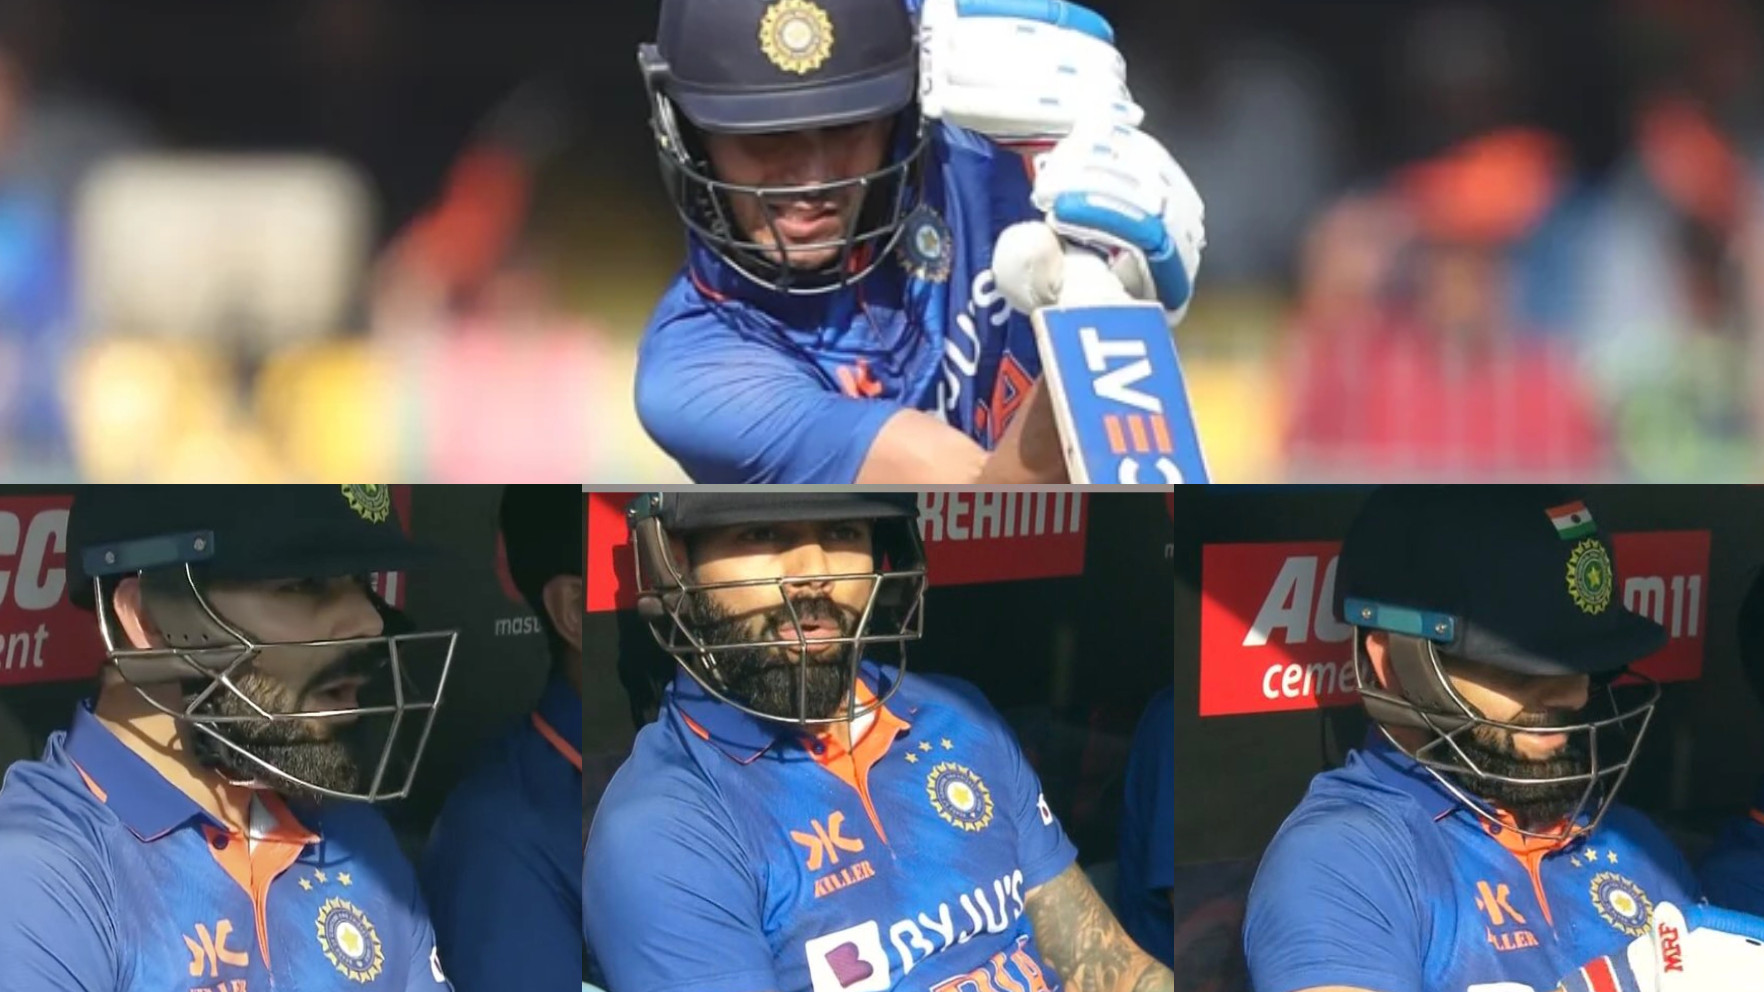 IND v SL 2023: WATCH- Virat Kohli’s amazing reactions after Shubman Gill survives a close LBW call